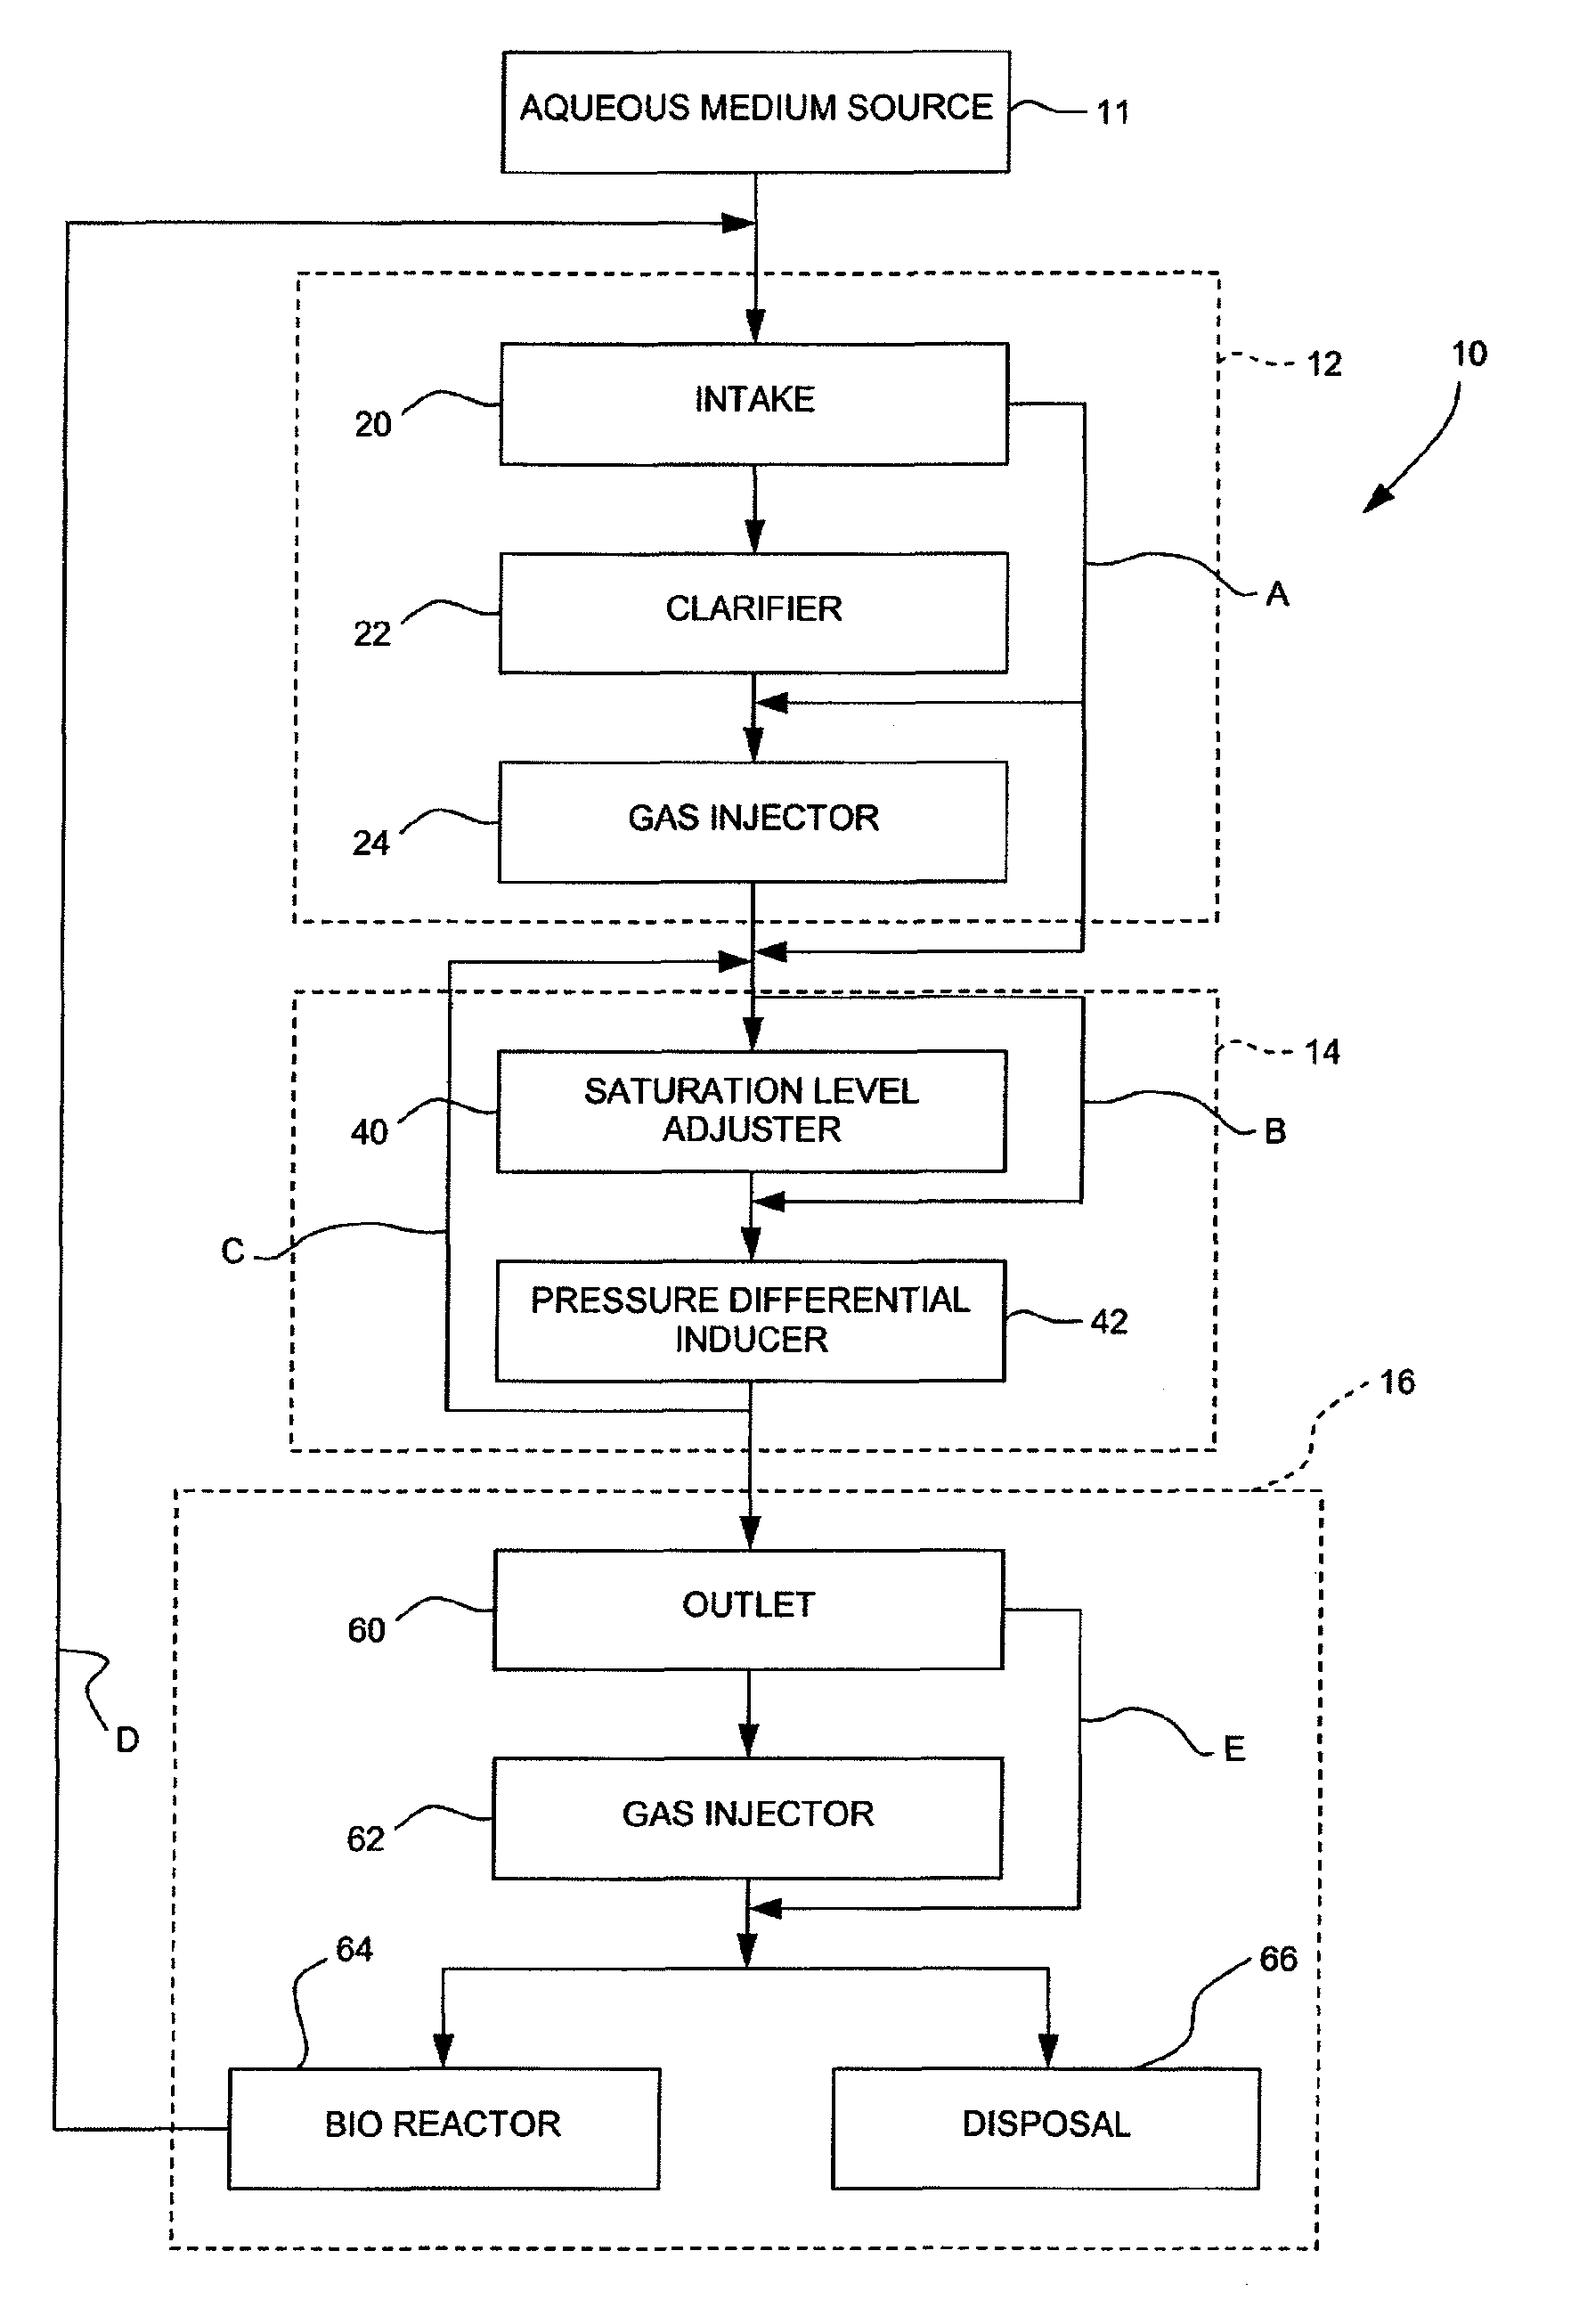 Apparatus and method for the non-chemical stabilization of bio-solids